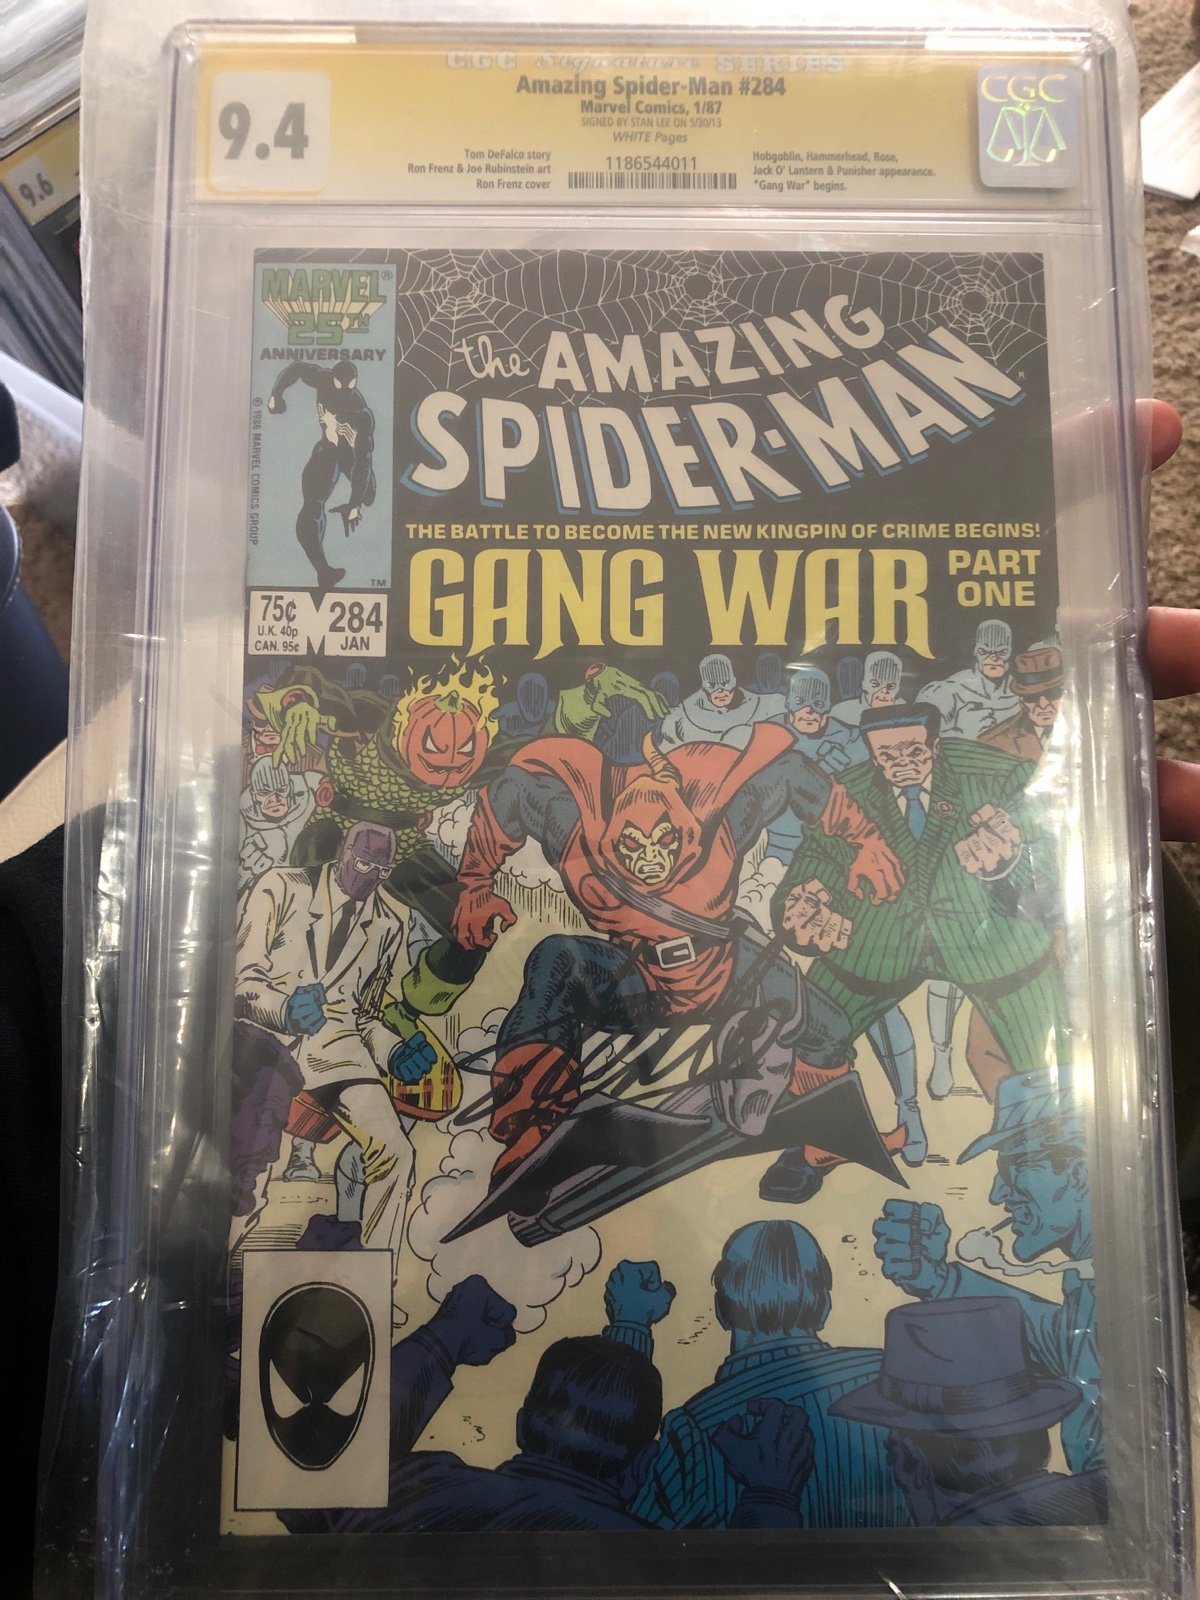 Amazing Spider-Man #284 01/1987 CGC 9.4 Signed By Stan Lee gmBGmdHWW